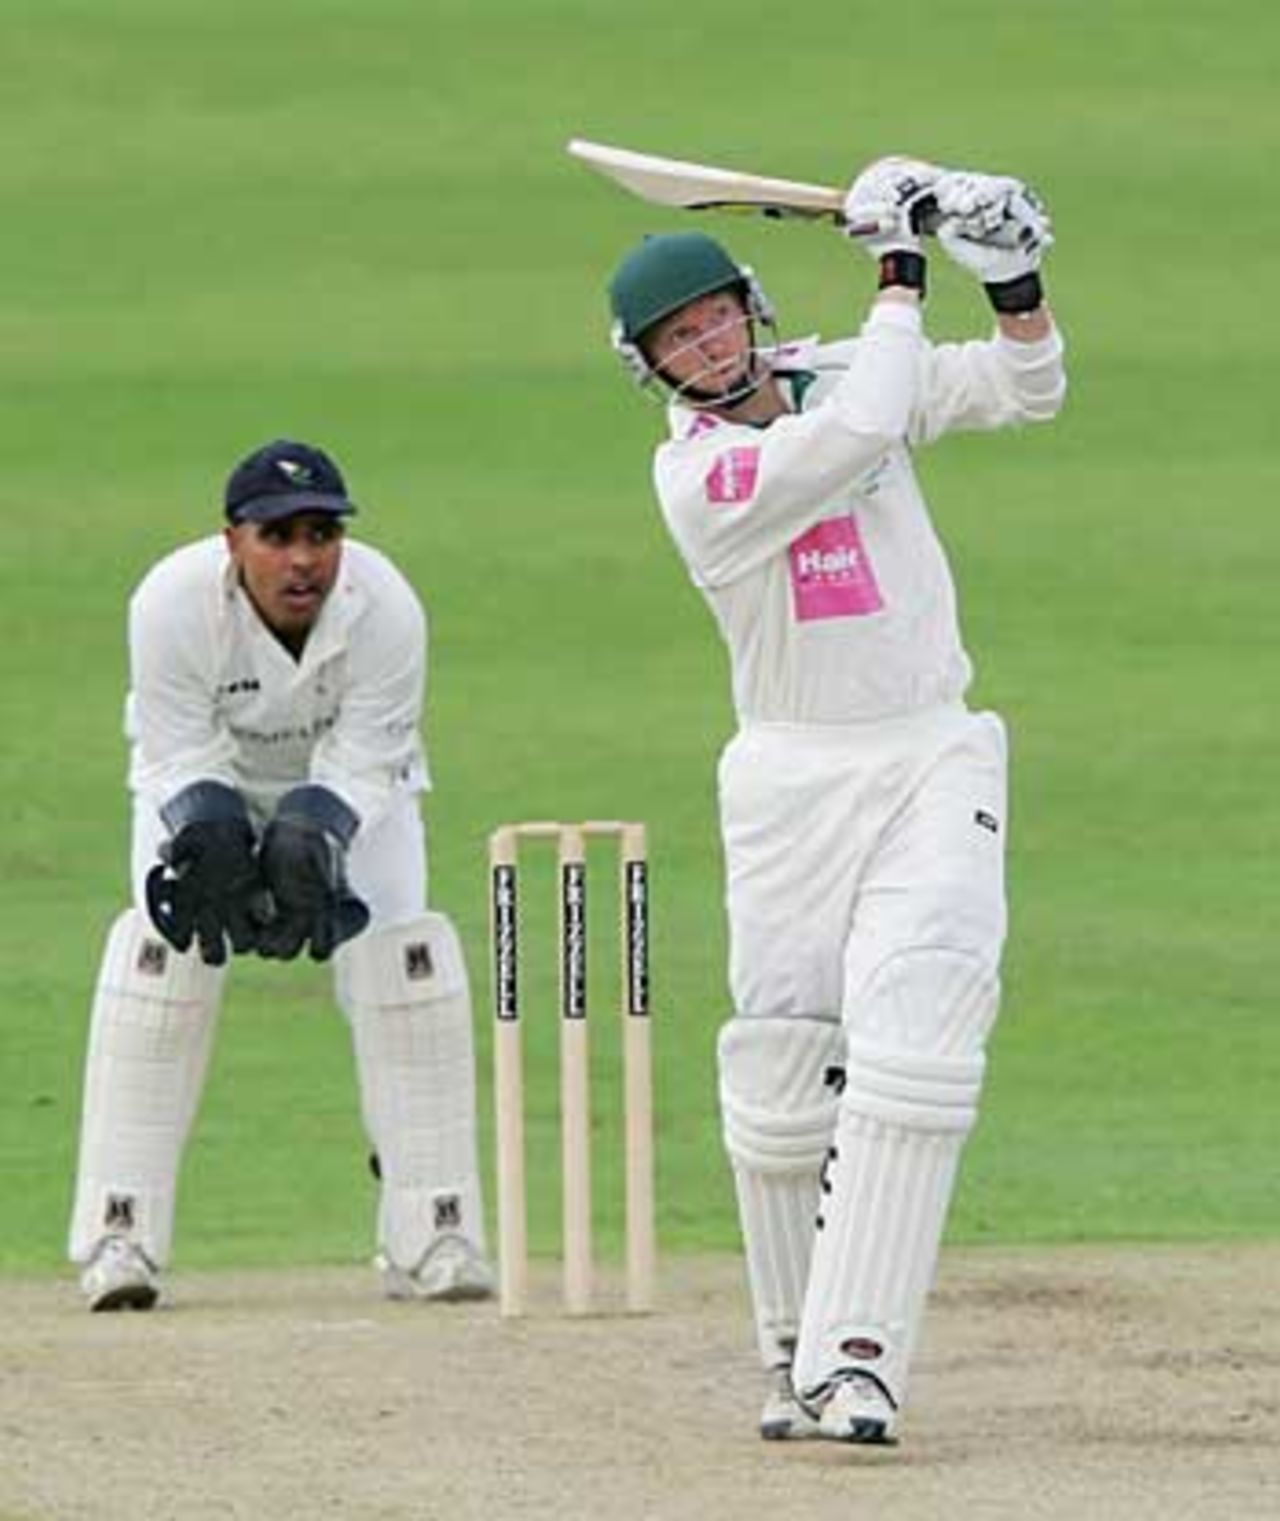 Ben Smith hits out against Richard Dawson, Worcestershire v Yorkshire, County Championship, Headingley, June 8